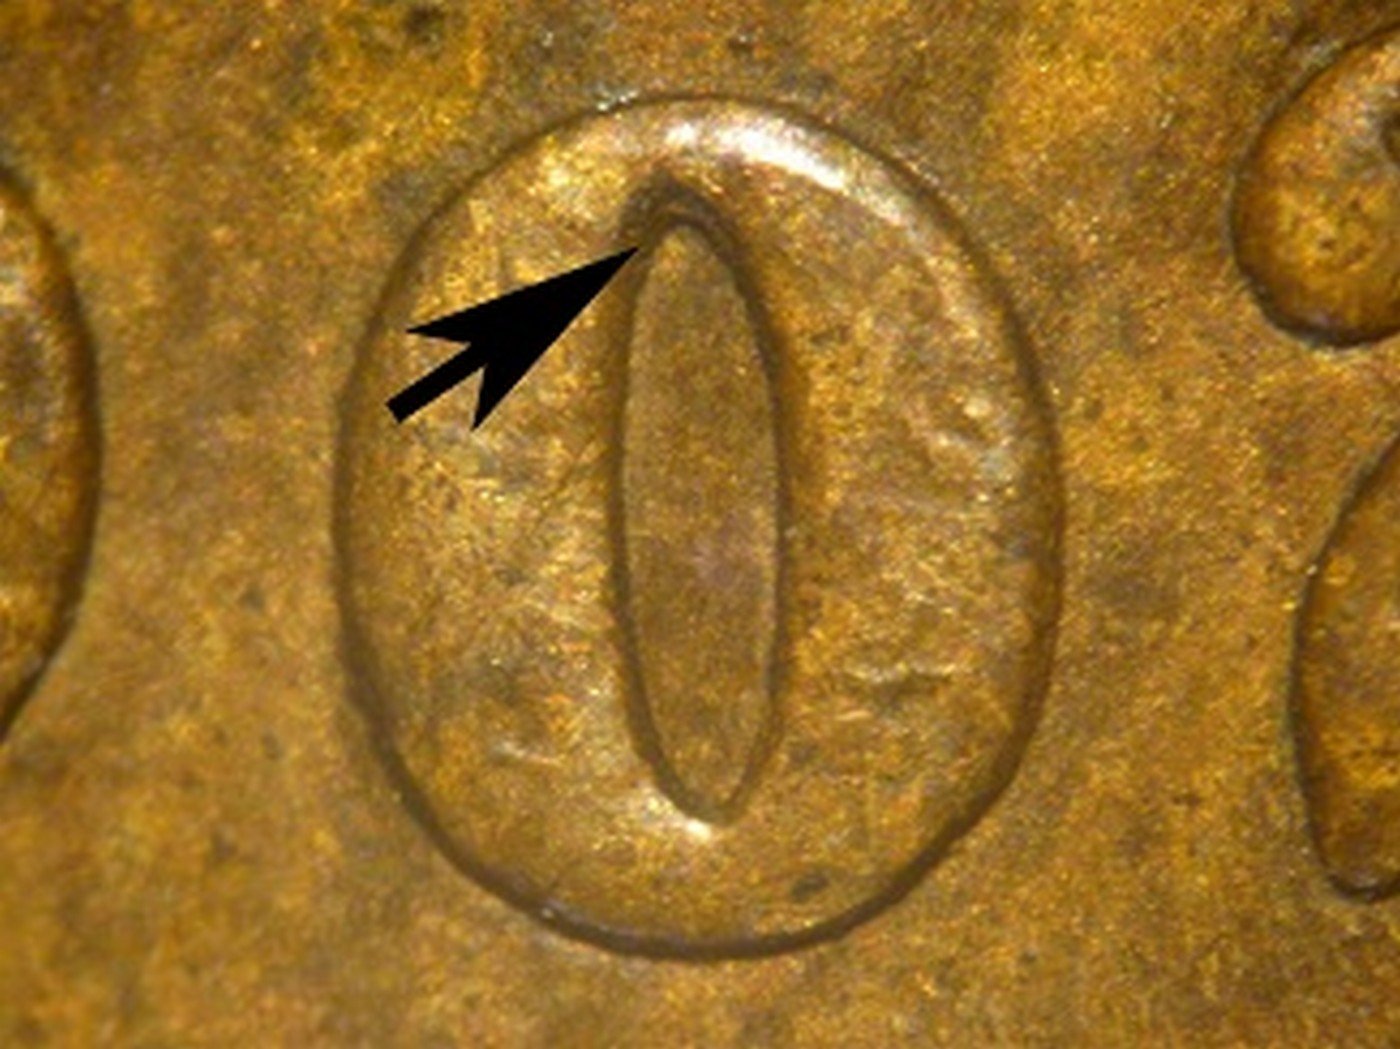 1902 RPD-007 - Indian Head Penny - Photo by David Poliquin